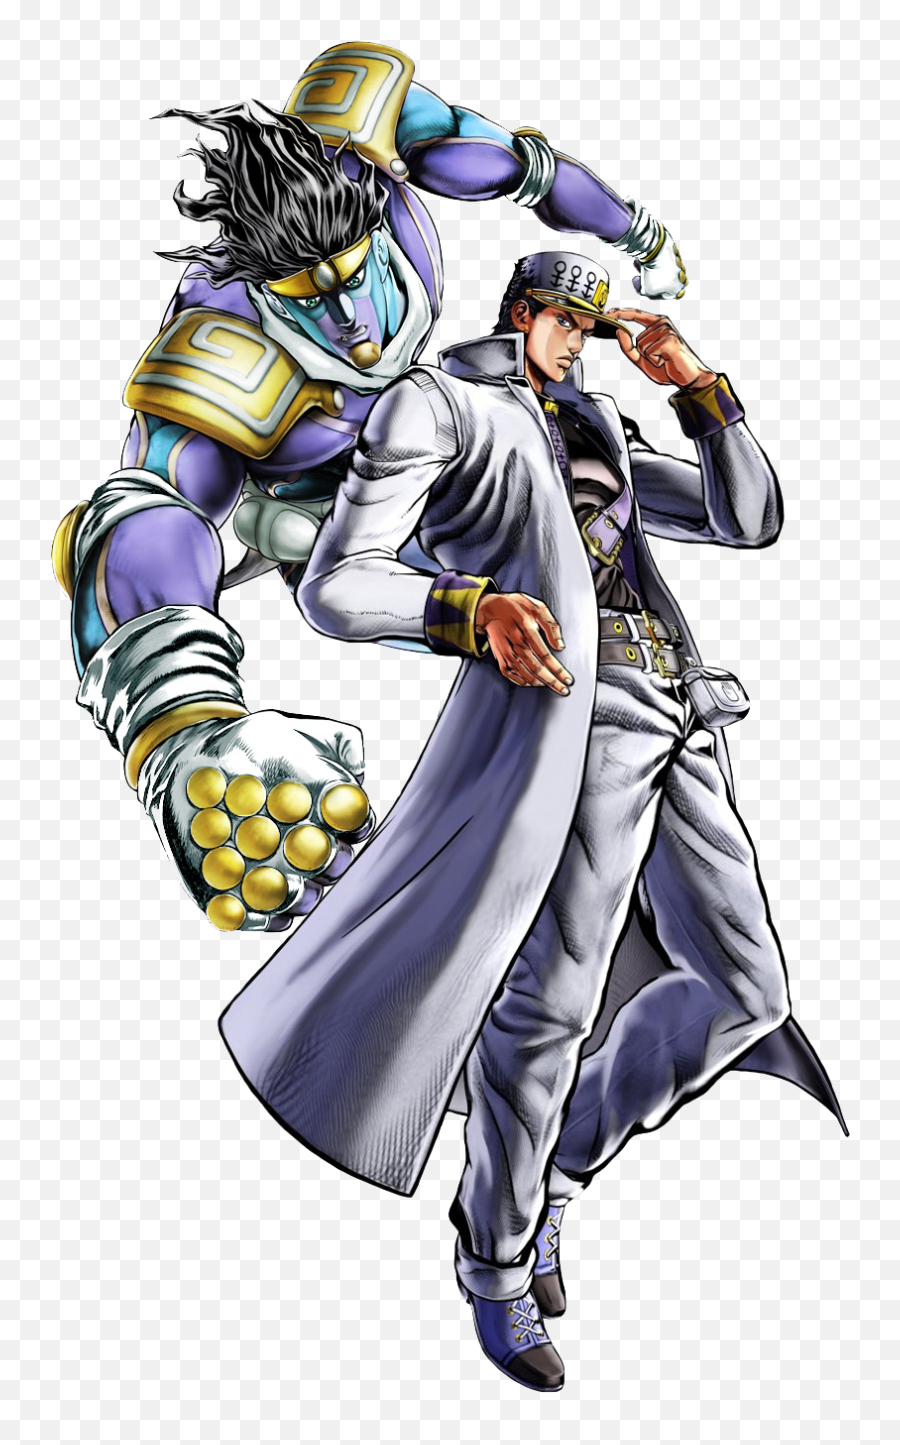 Png Image With Transparent Background - Jotaro Part 4 Eyes Of Heaven,Monster Eyes Png